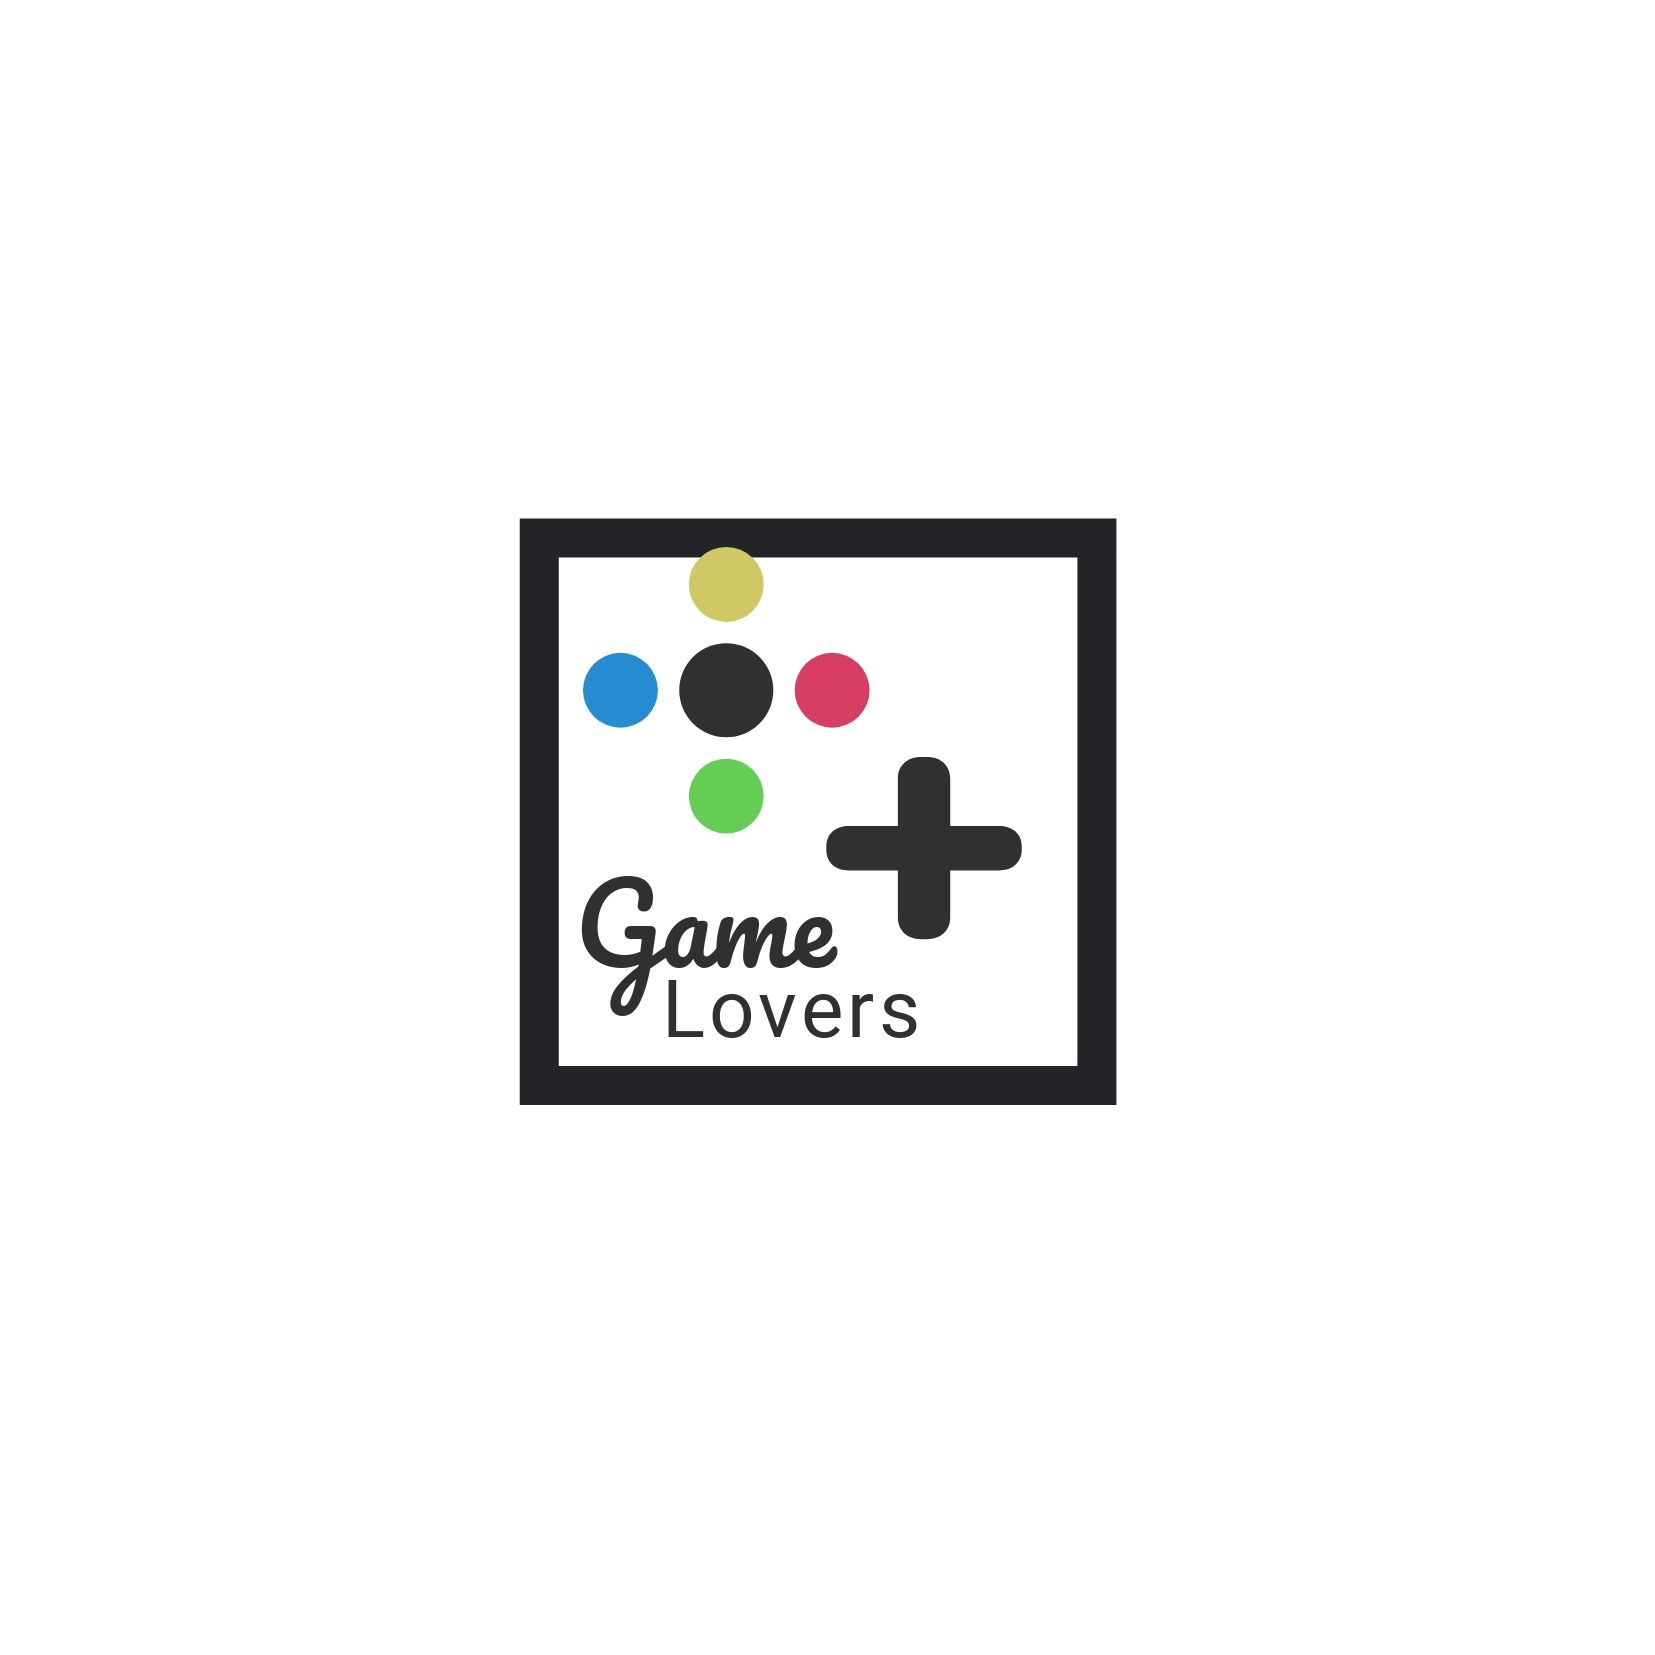 Abstract gamepad logo and title 'Game Lovers' - Pros of the Boogaloo typeface - Image